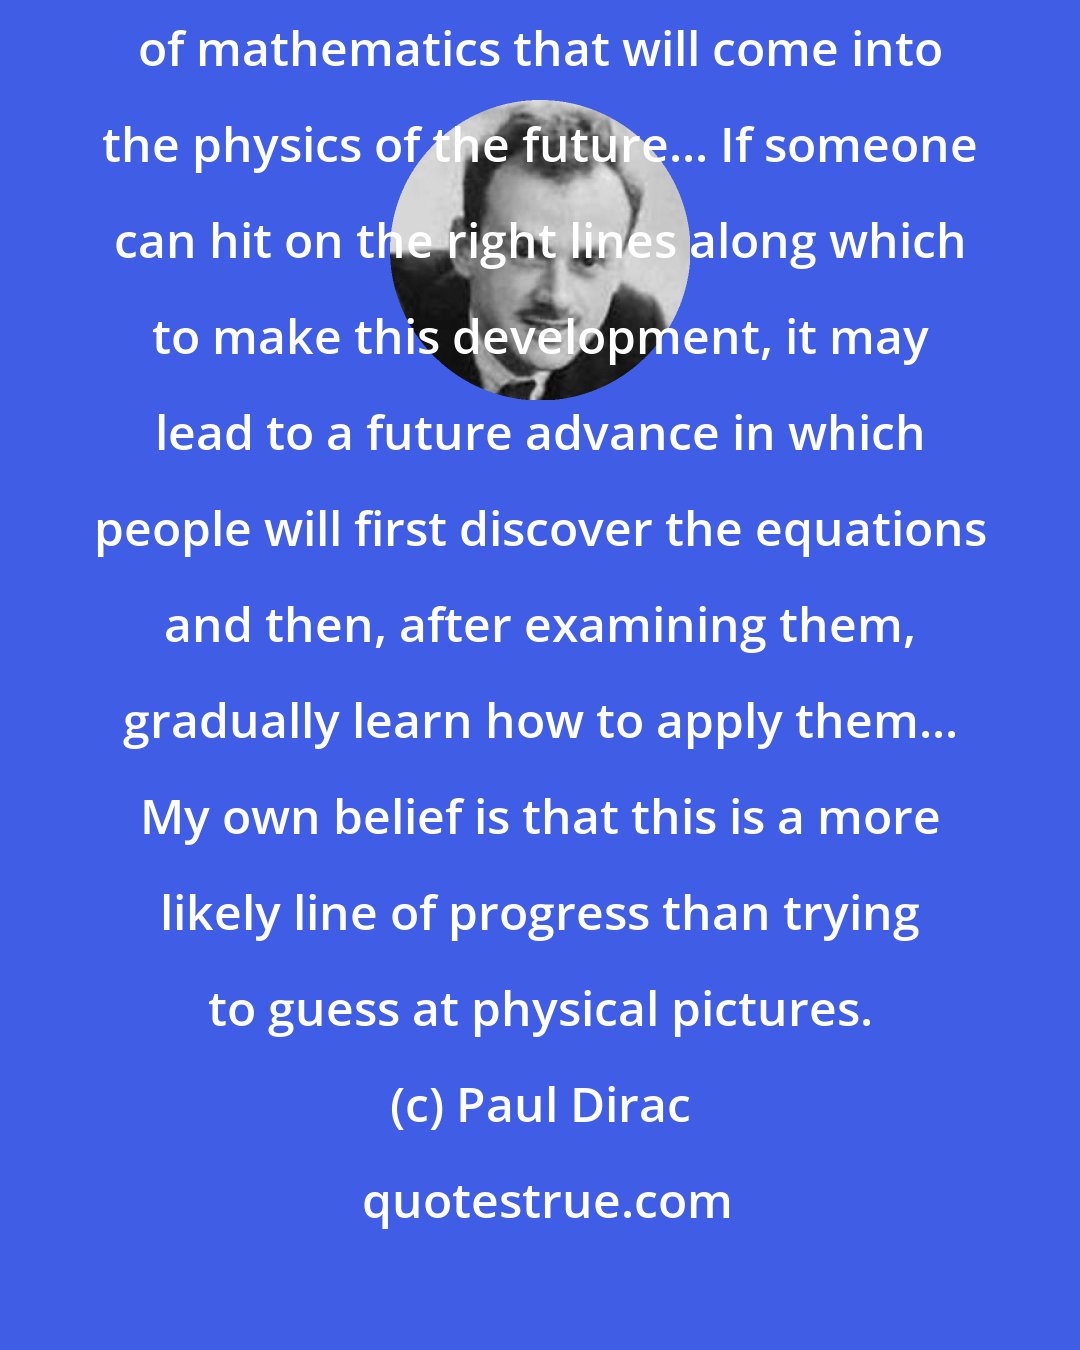 Paul Dirac: Just by studying mathematics we can hope to make a guess at the kind of mathematics that will come into the physics of the future... If someone can hit on the right lines along which to make this development, it may lead to a future advance in which people will first discover the equations and then, after examining them, gradually learn how to apply them... My own belief is that this is a more likely line of progress than trying to guess at physical pictures.